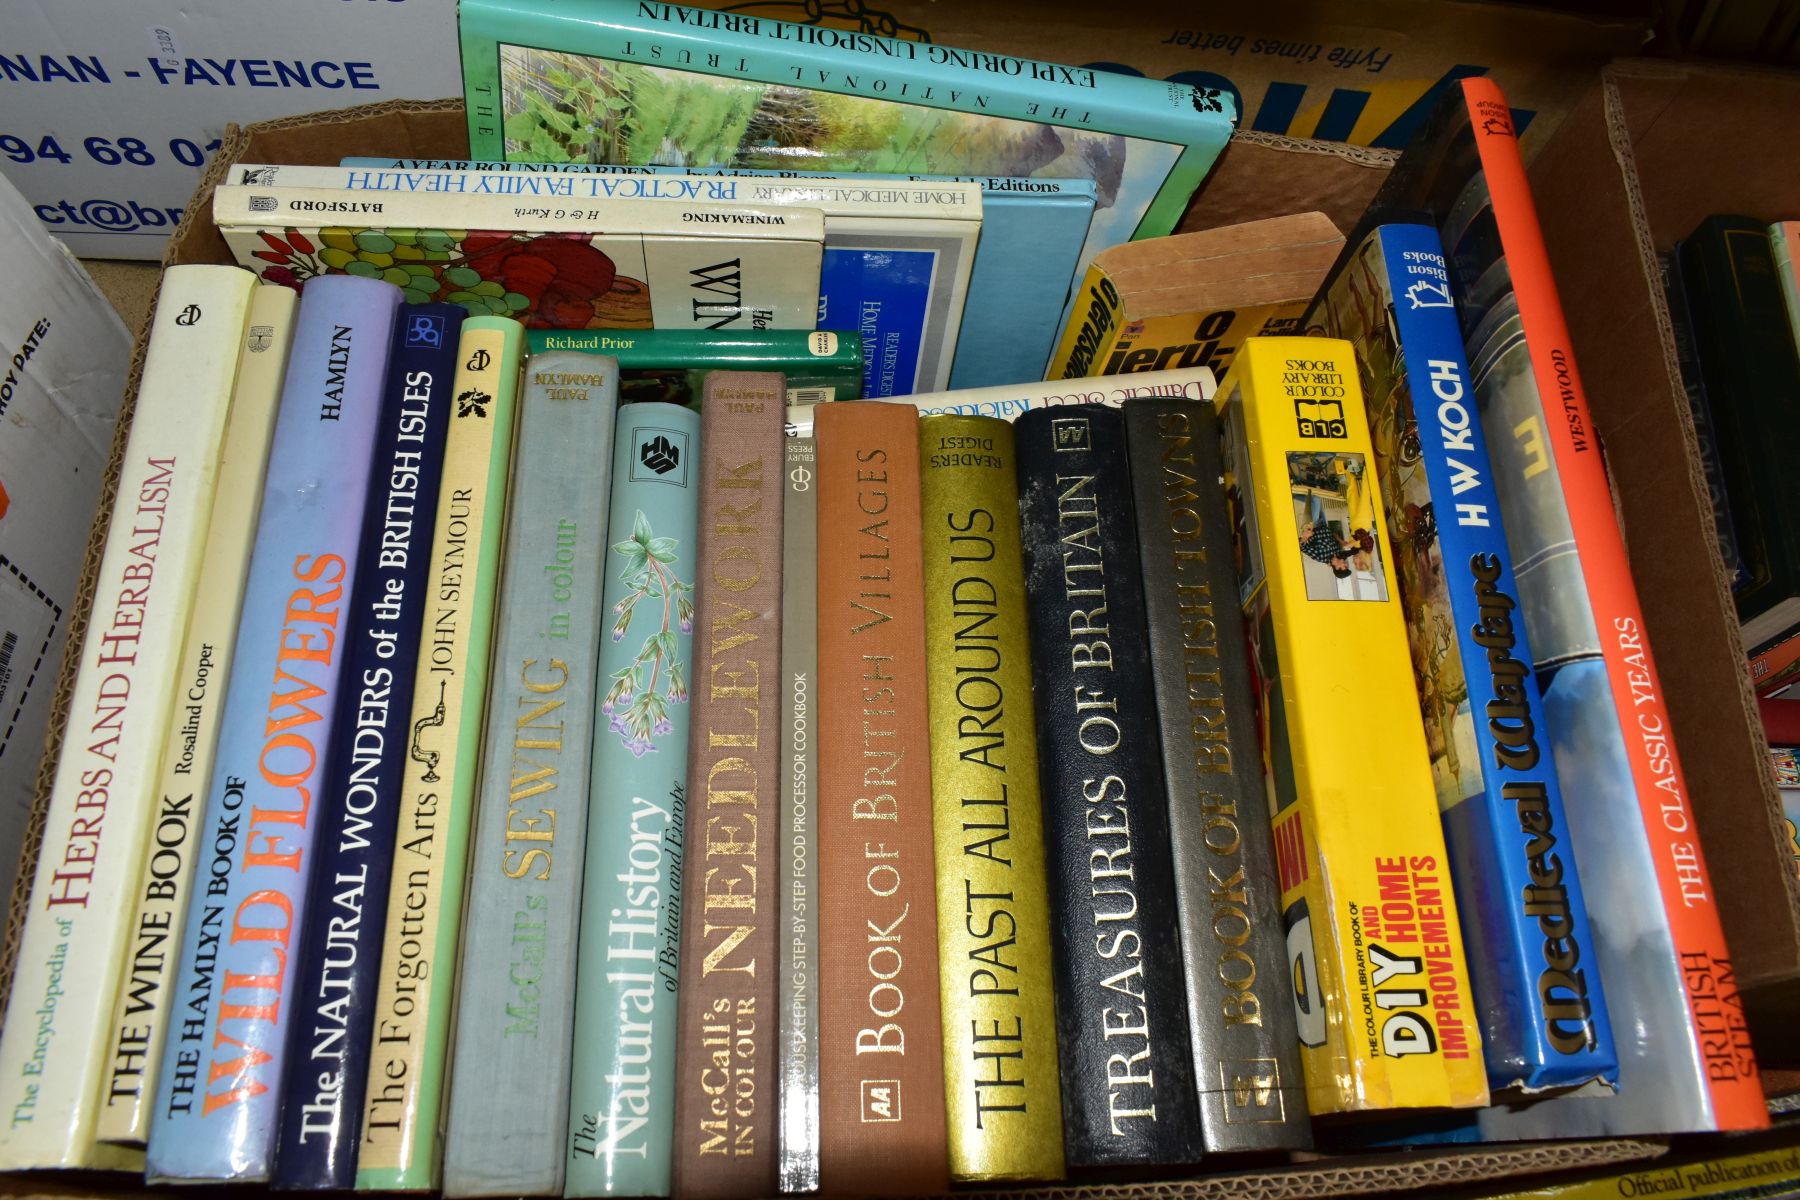 FIVE BOXES OF BOOKS, approximately one hundred and ten books, titles to include fiction, needlework, - Image 3 of 6